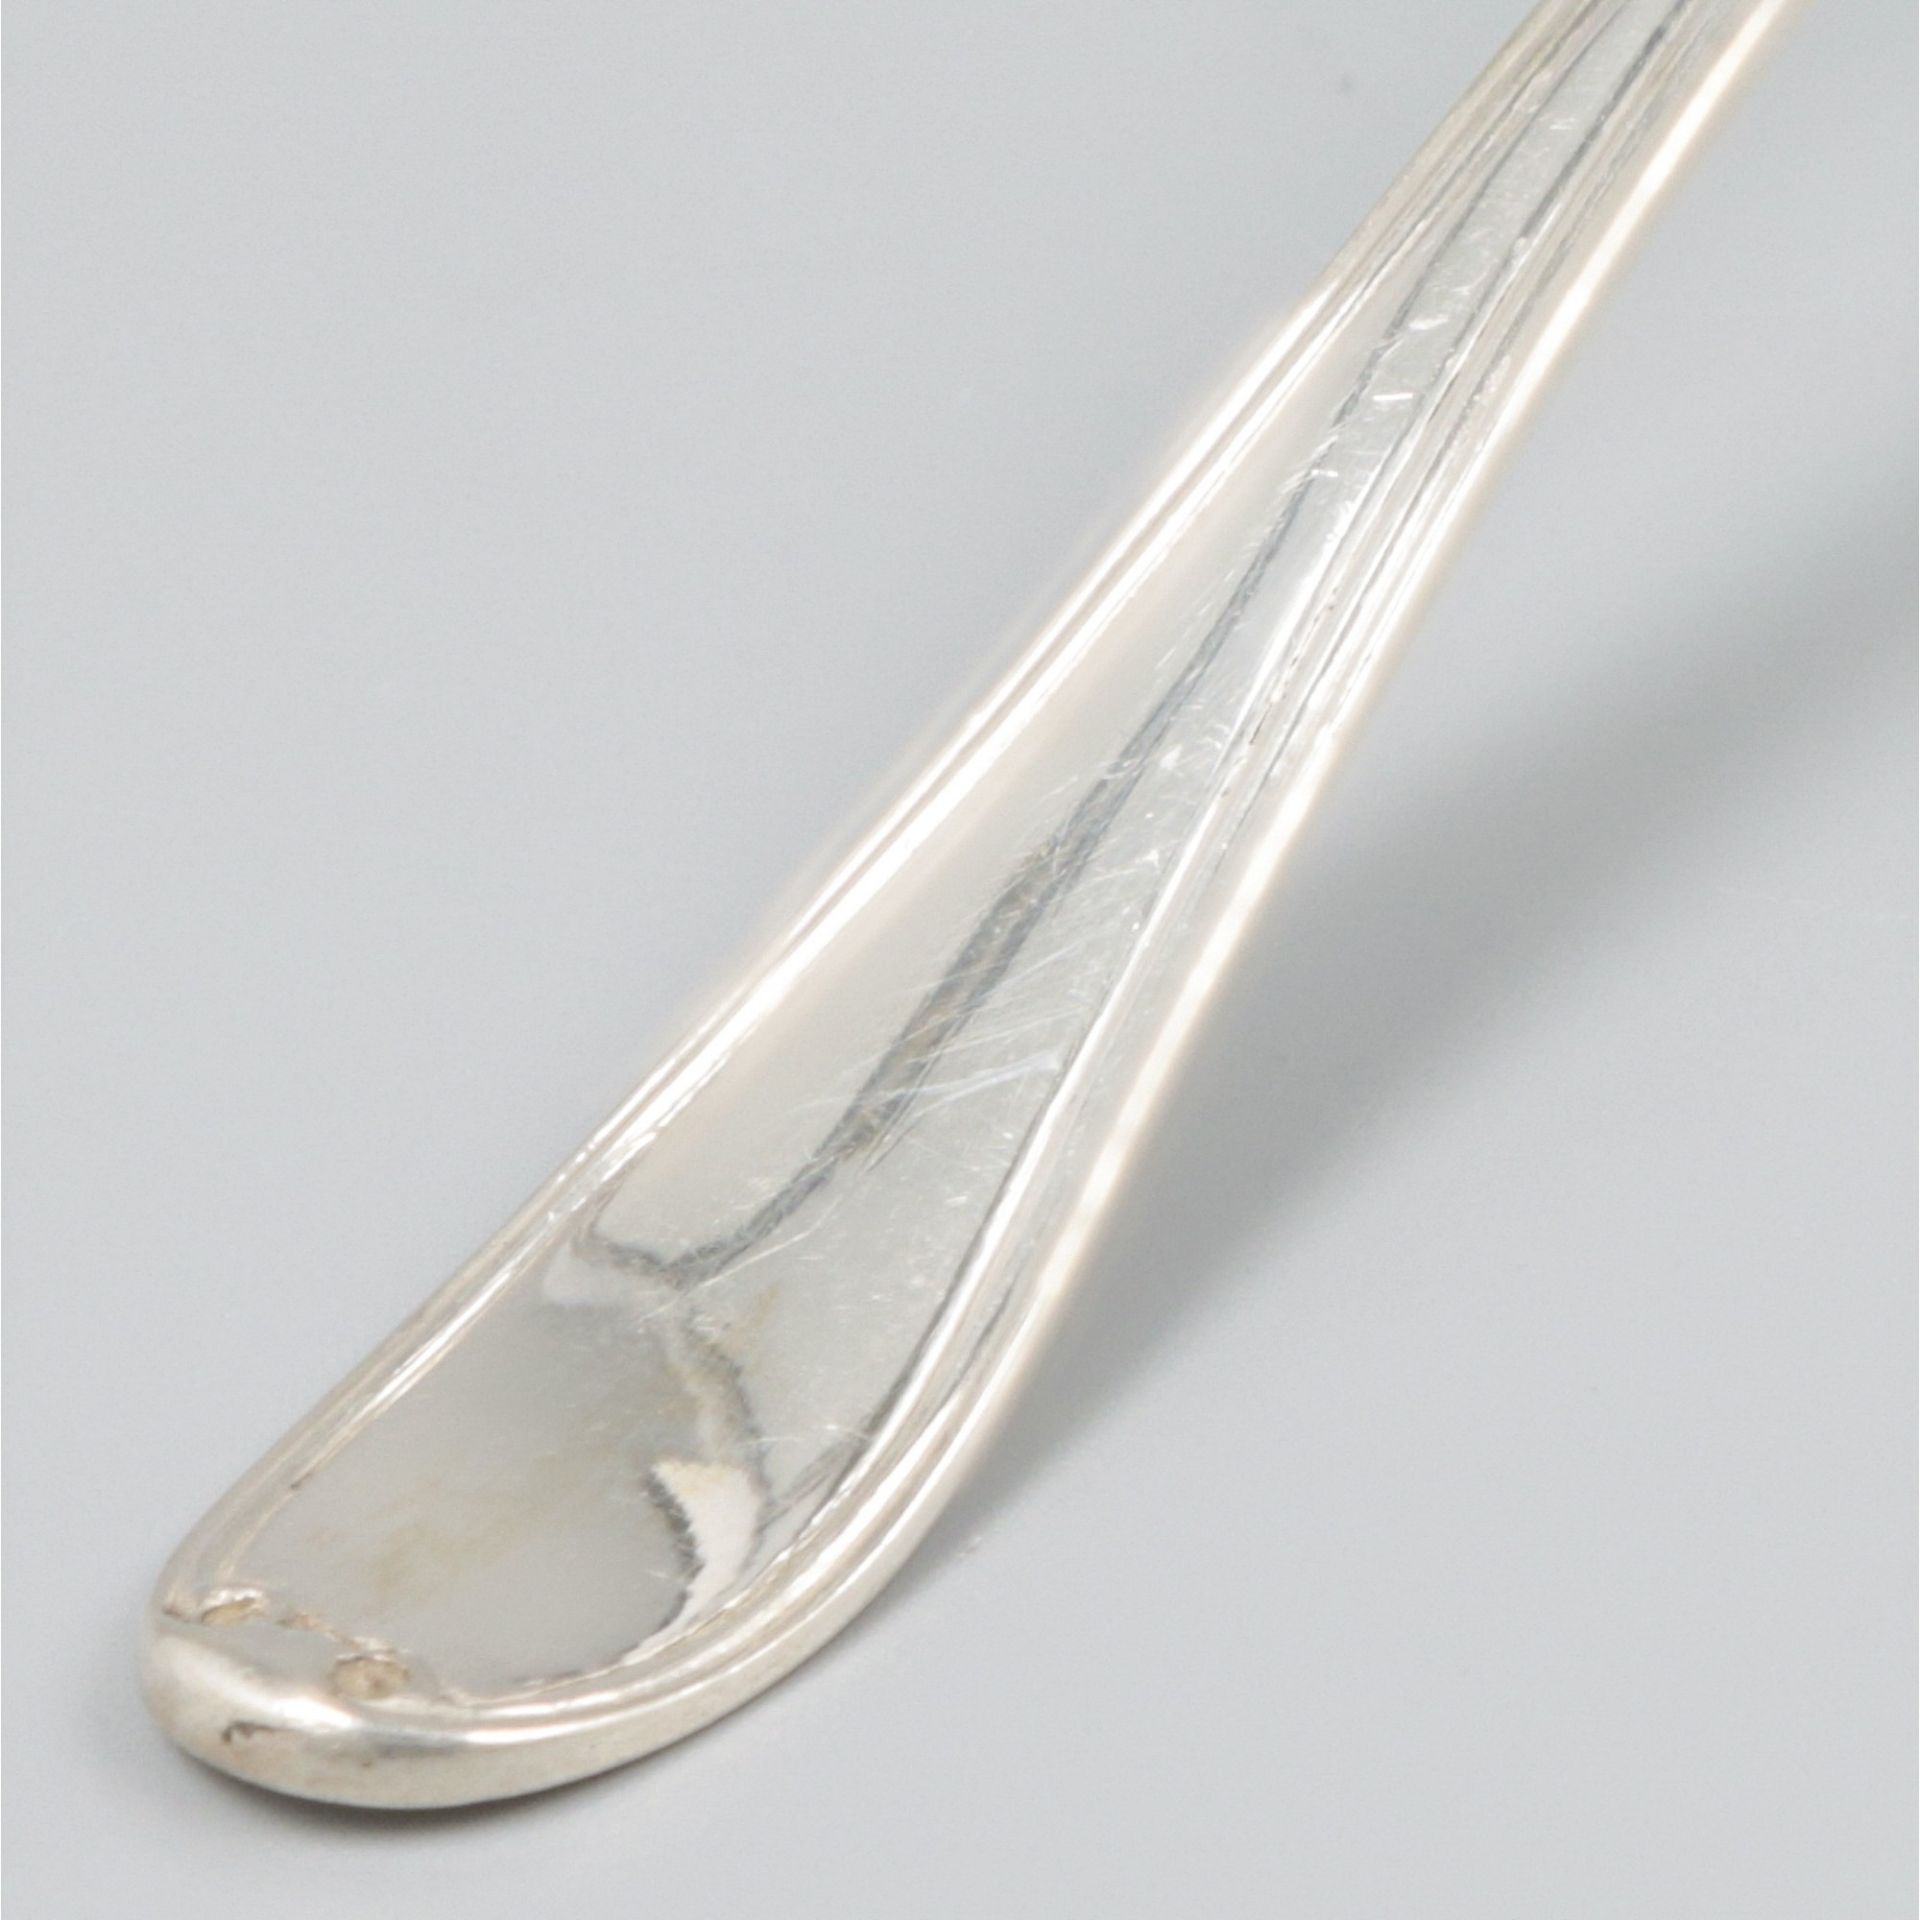 Sifter spoon silver. - Image 4 of 5